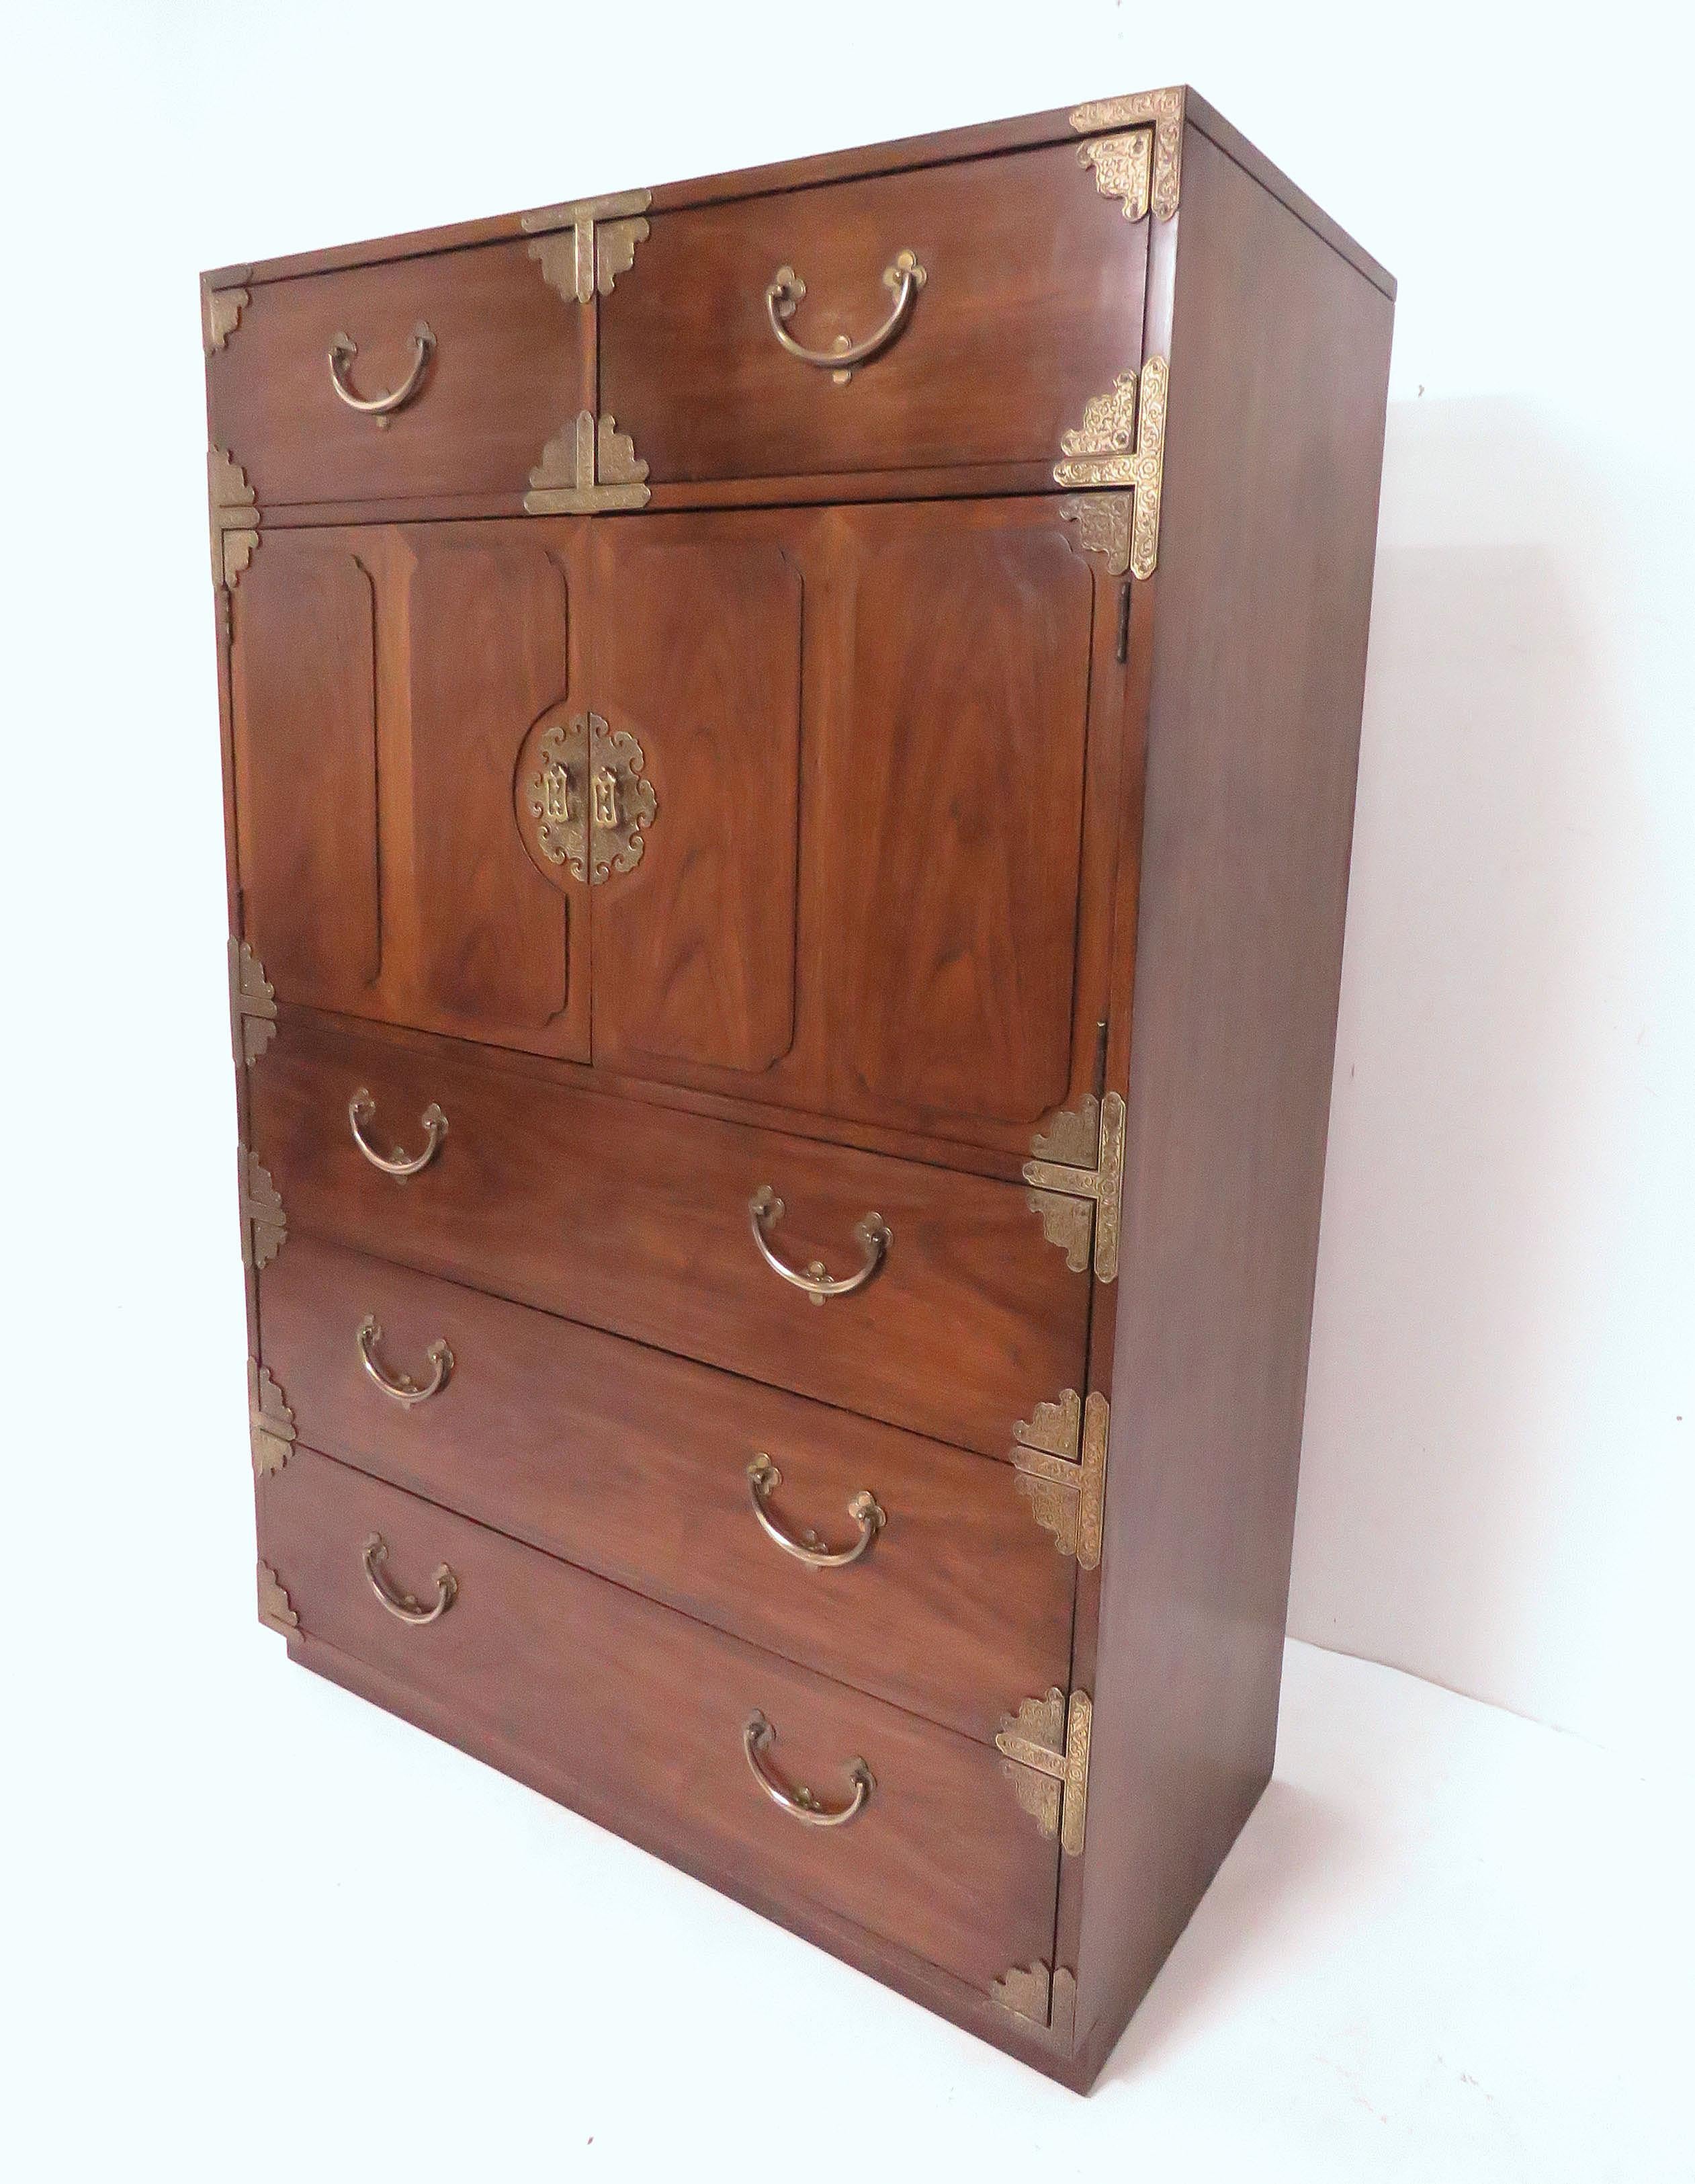 Highboy campaign chest in walnut by Thomasville, circa 1970s. This line, identical to the 